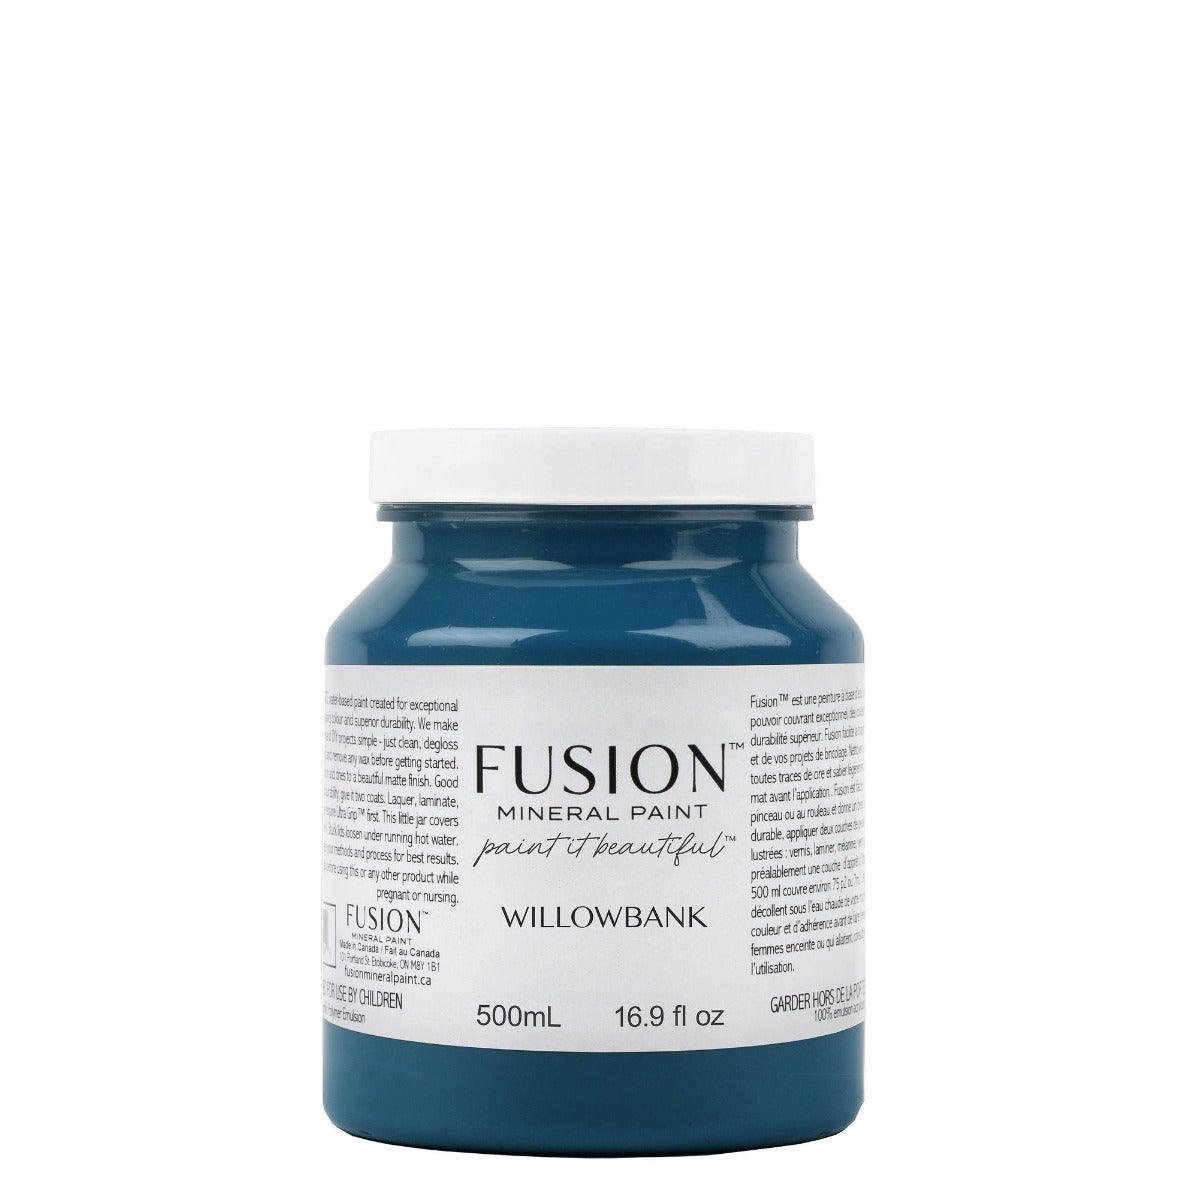 Acrylfarbe | Fusion Mineral Paint - Willowbank